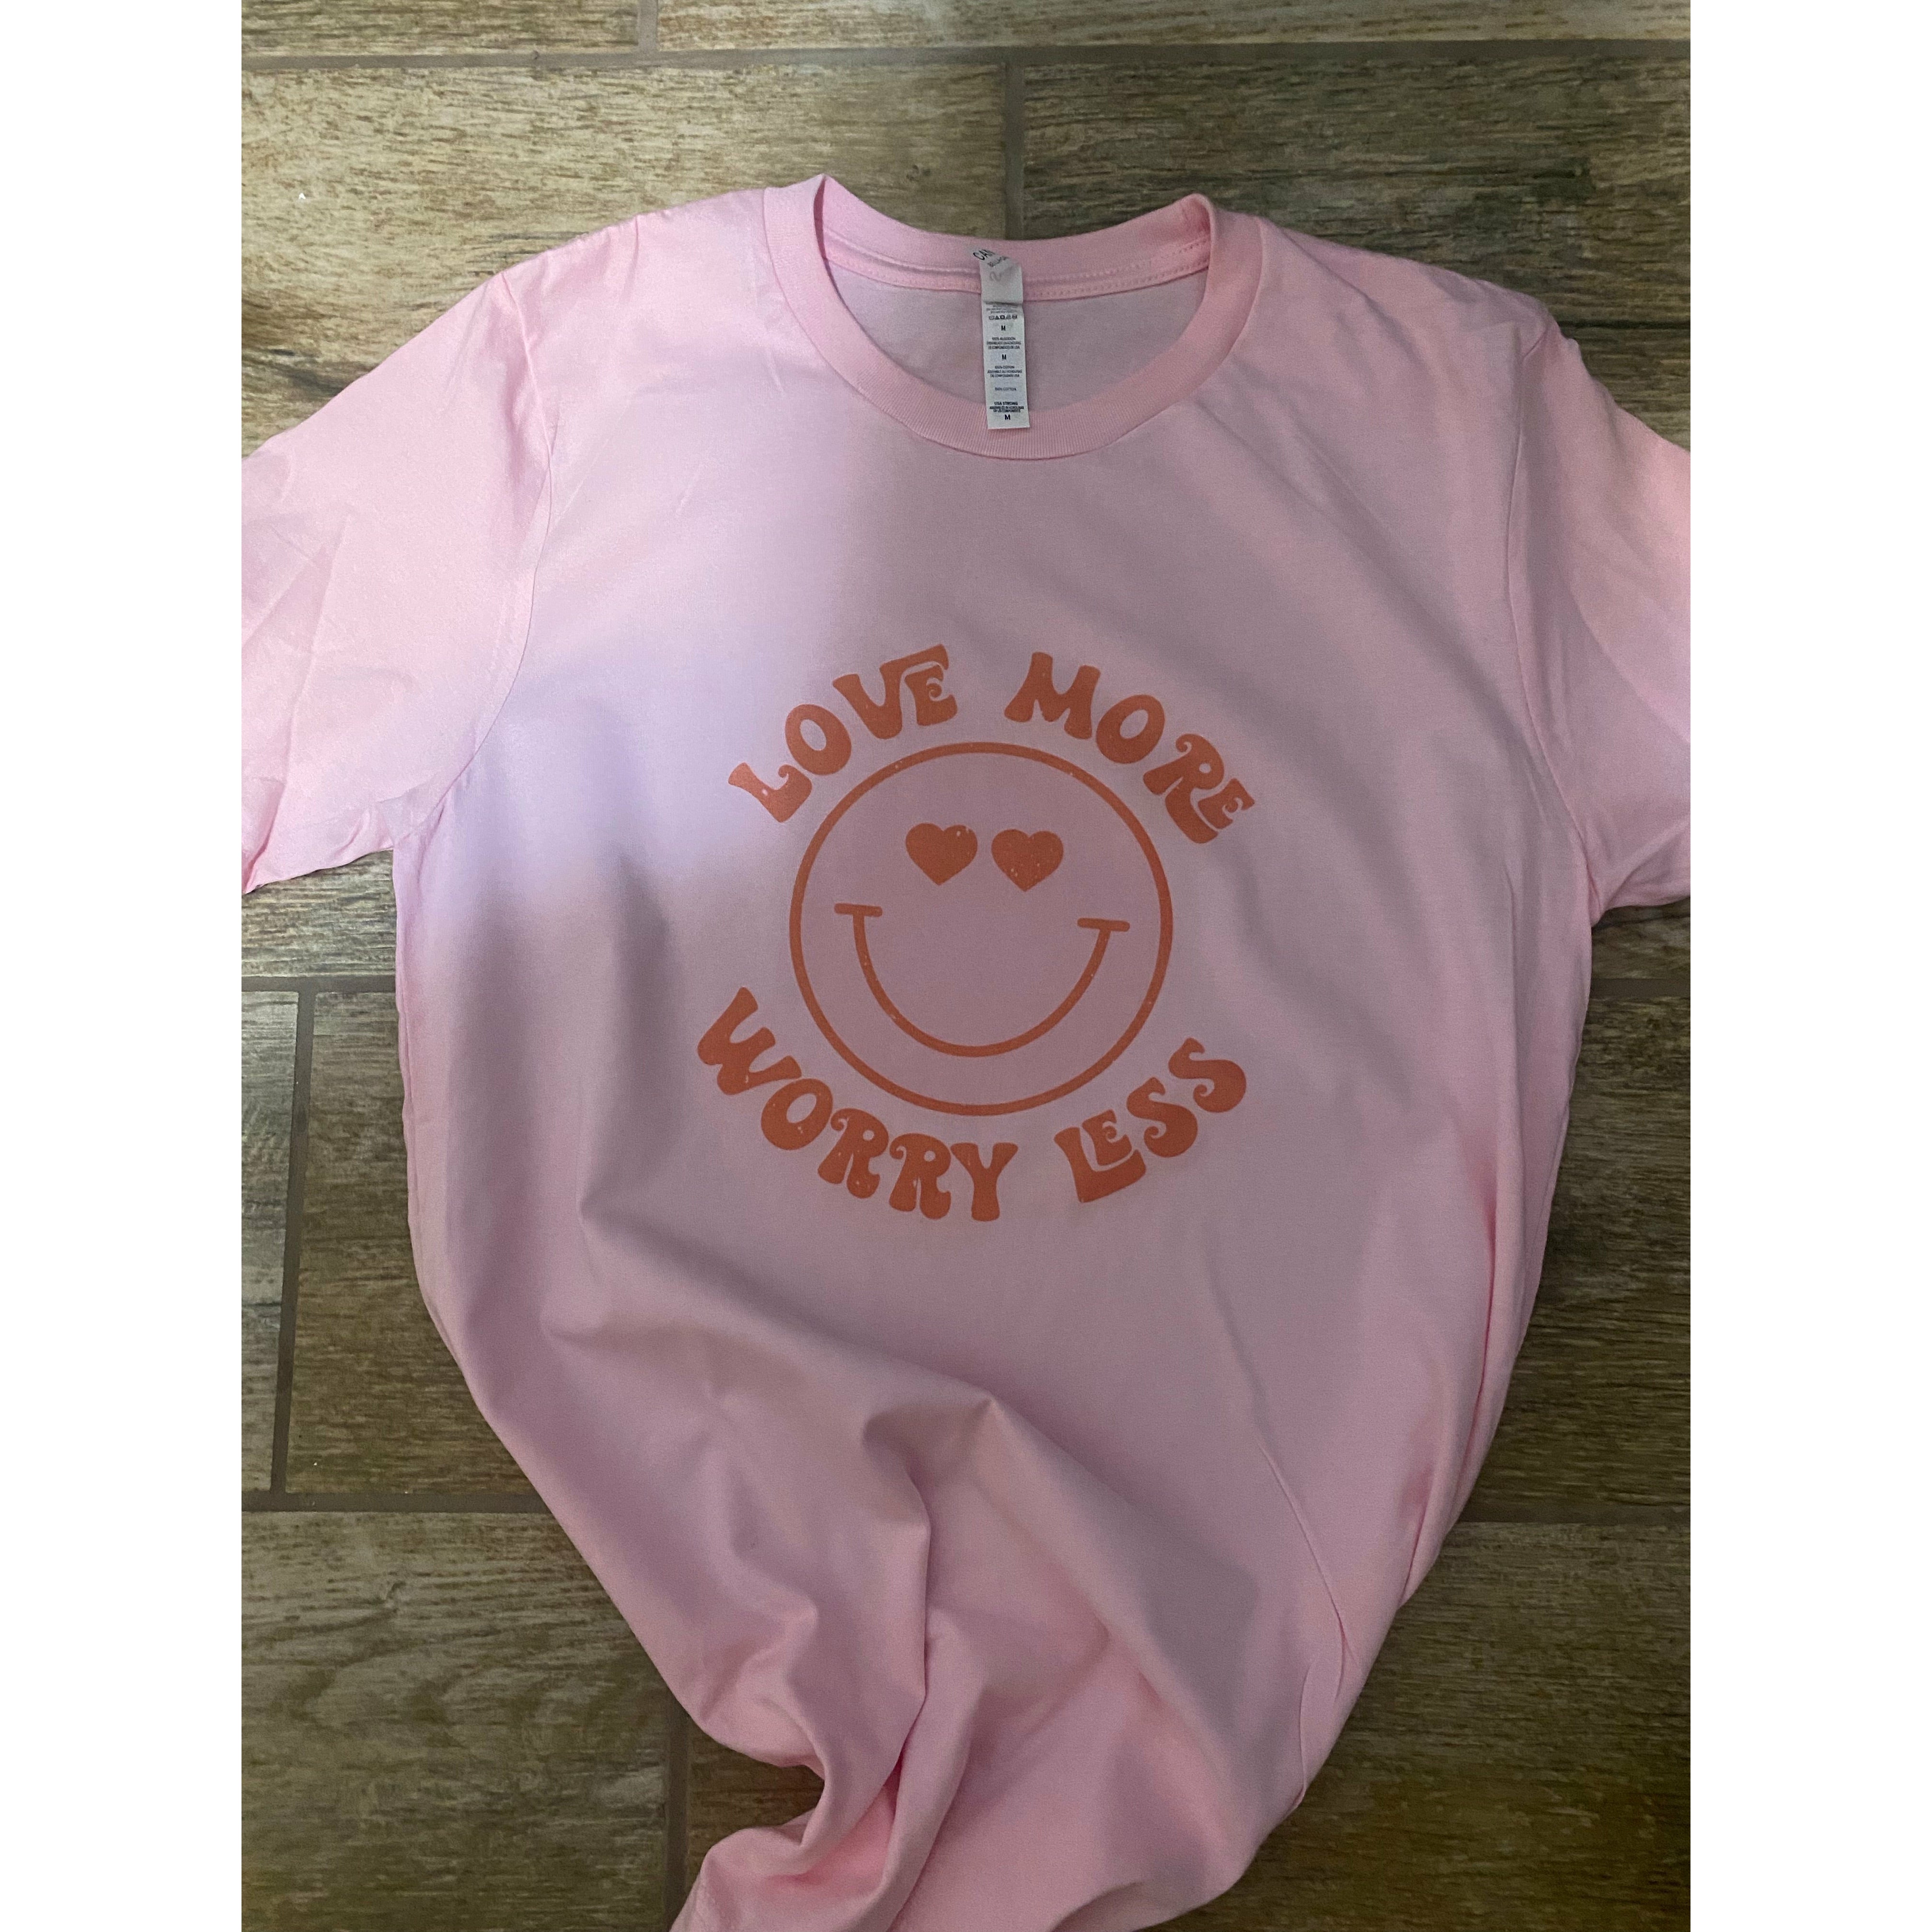 Worry Less (Light Pink or White Only)